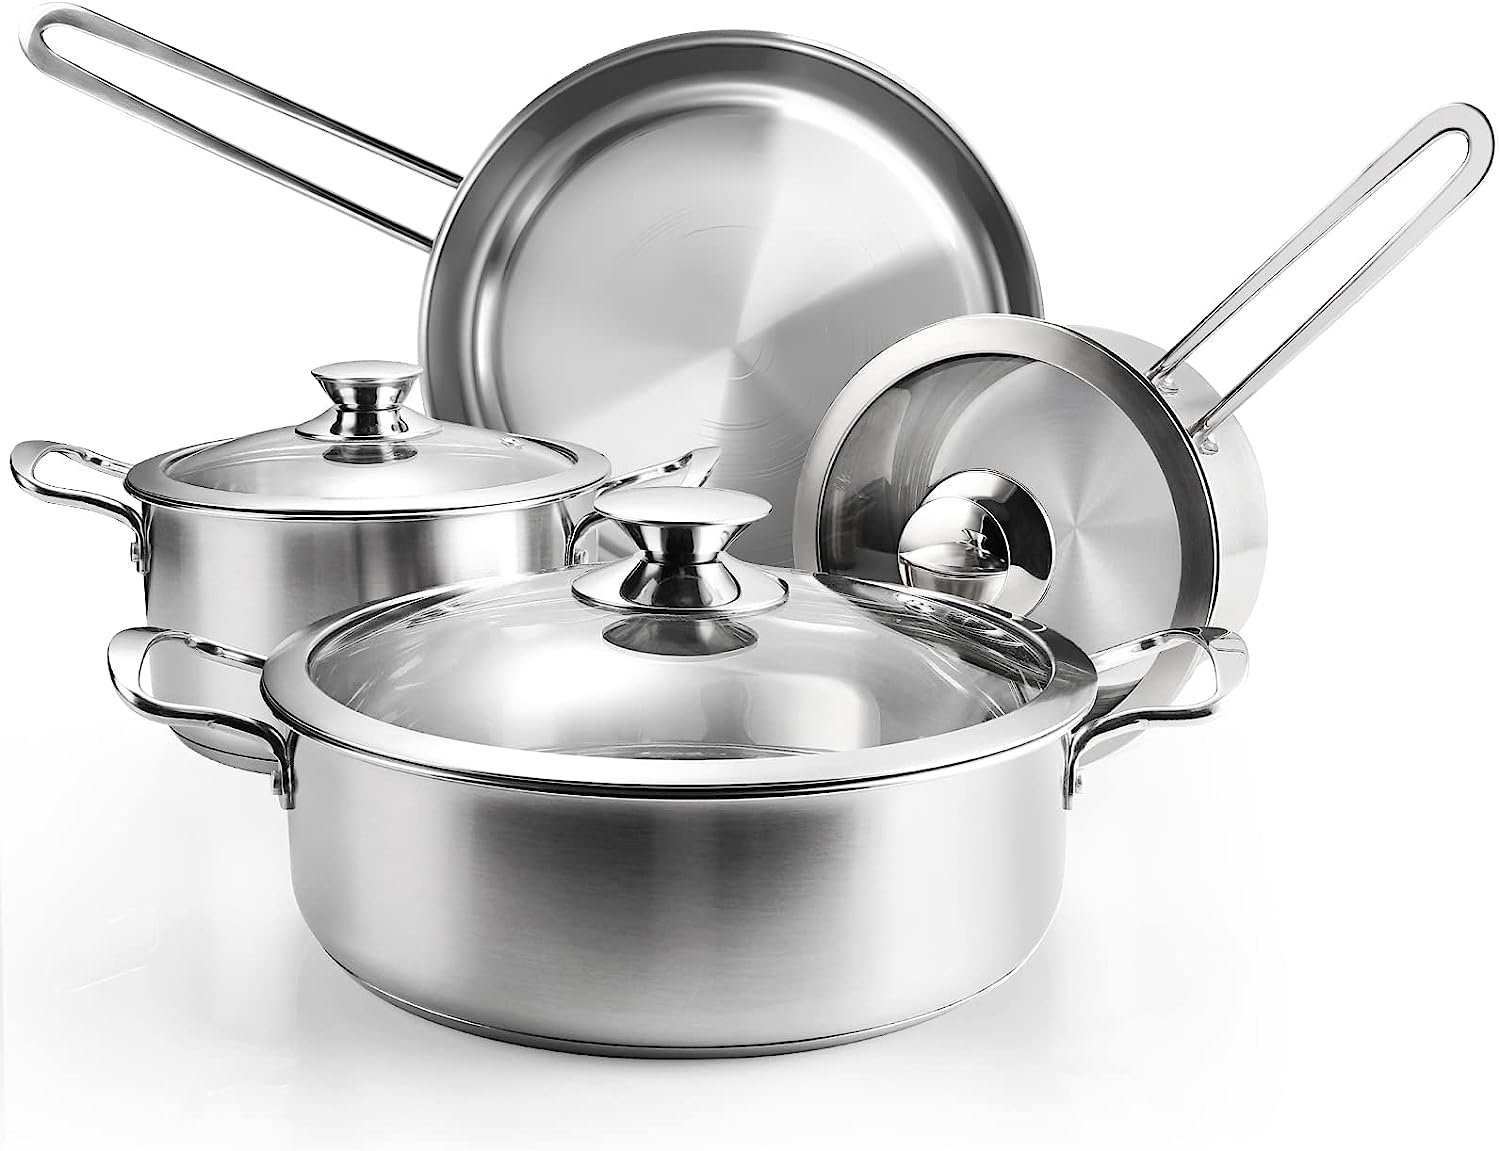 Stainless Steel Pots and Pans Set, 7-Piece Kitchen [...]